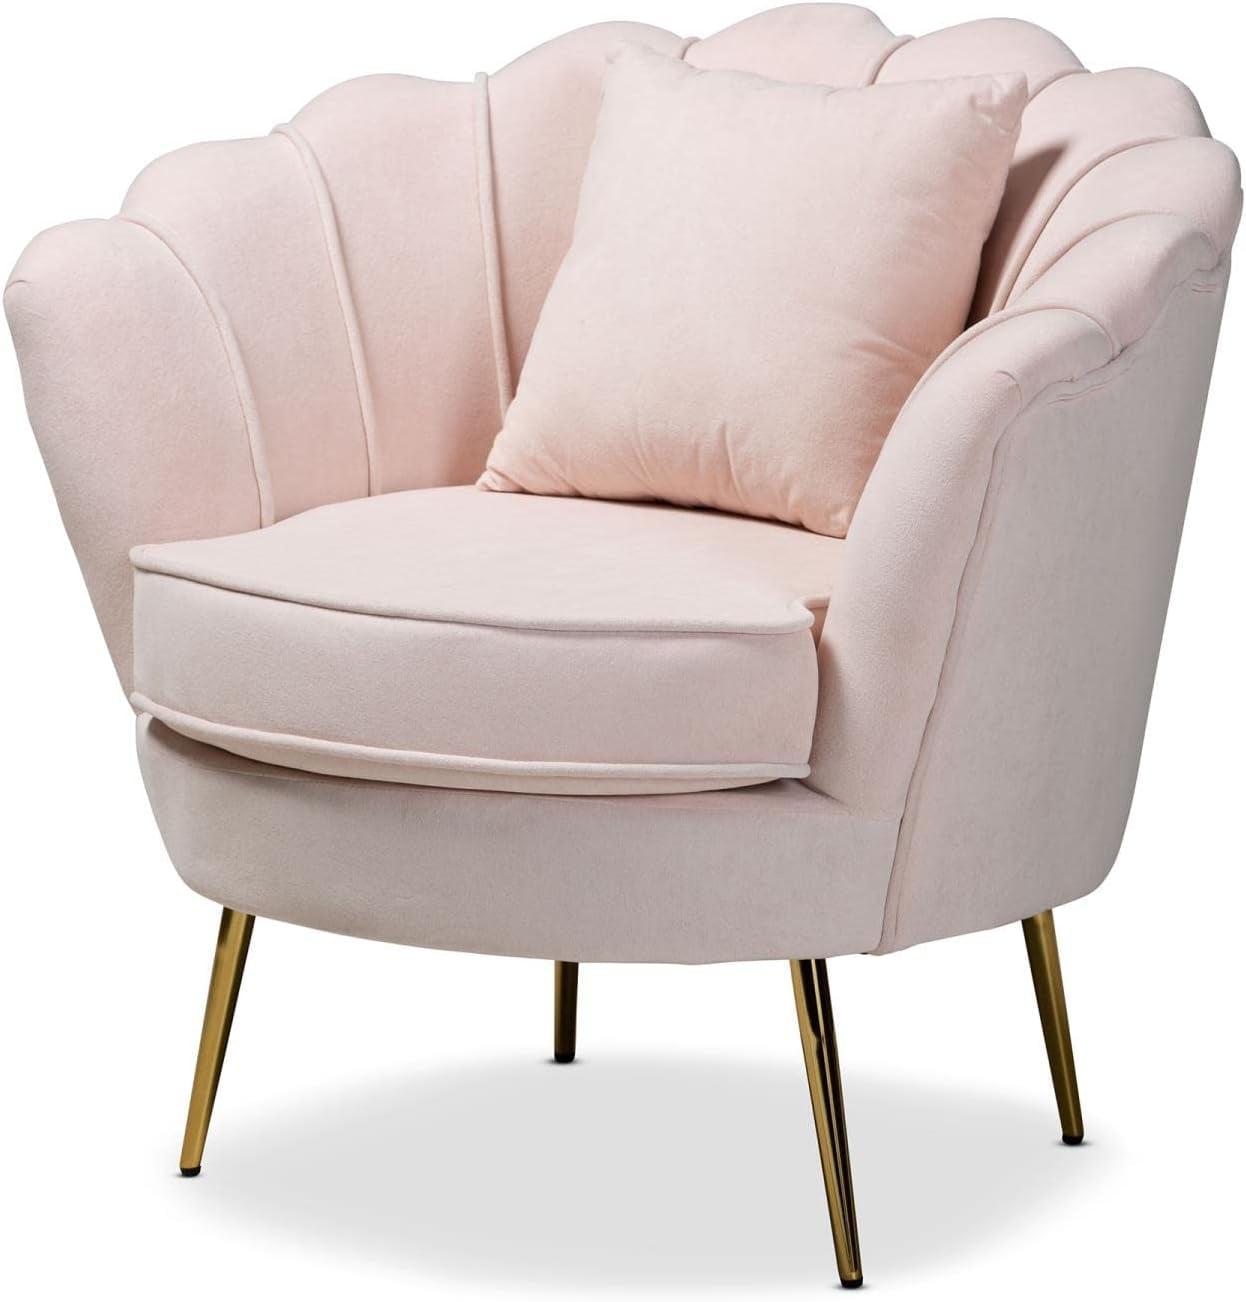 Blush Pink Velvet Handcrafted Accent Chair with Manufactured Wood Frame